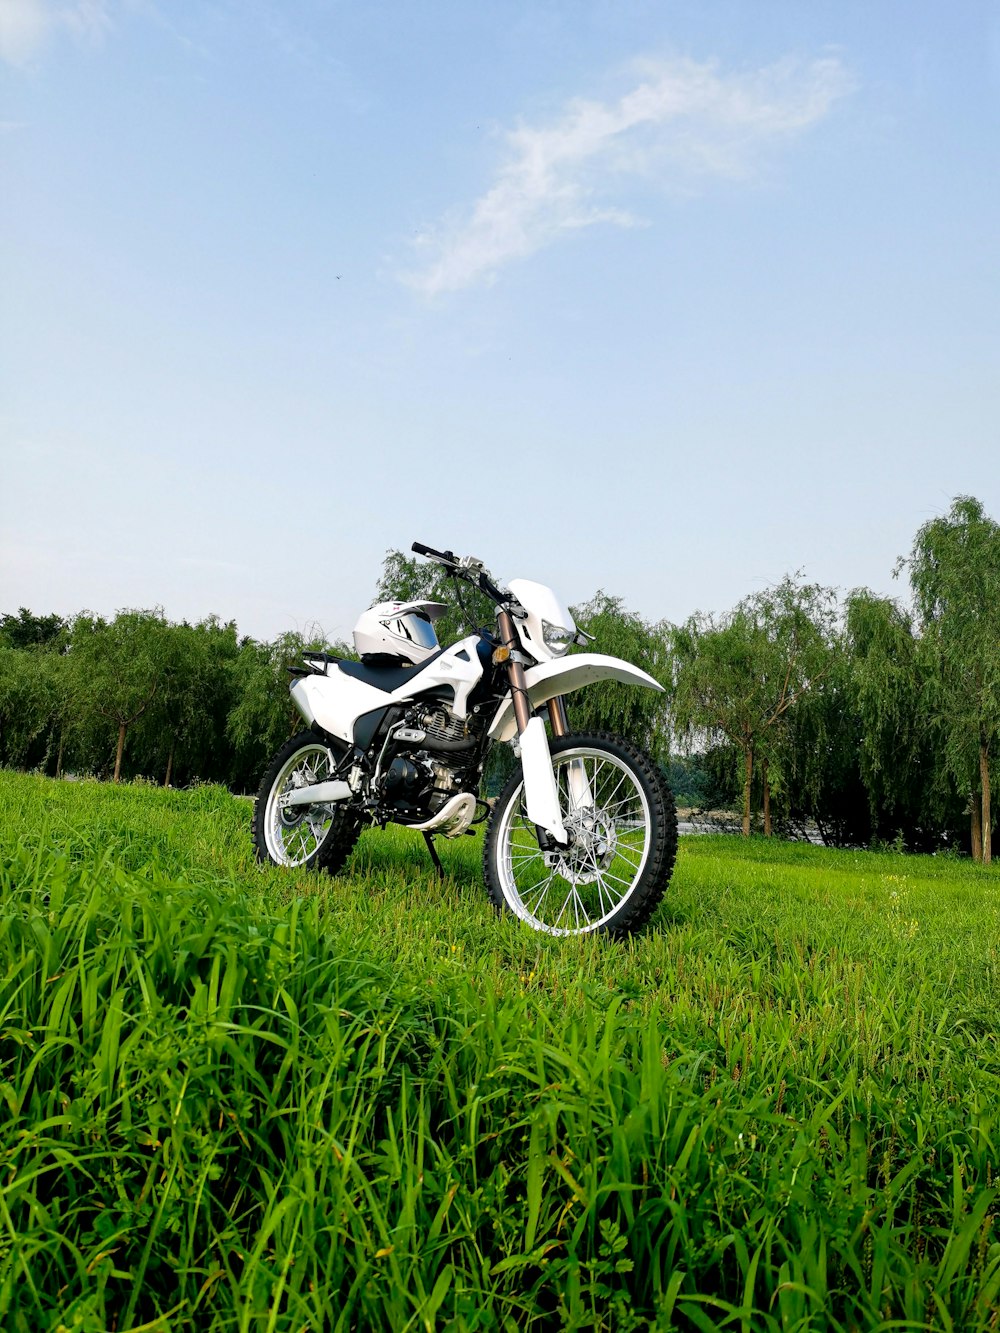 a motorcycle parked in a grassy field